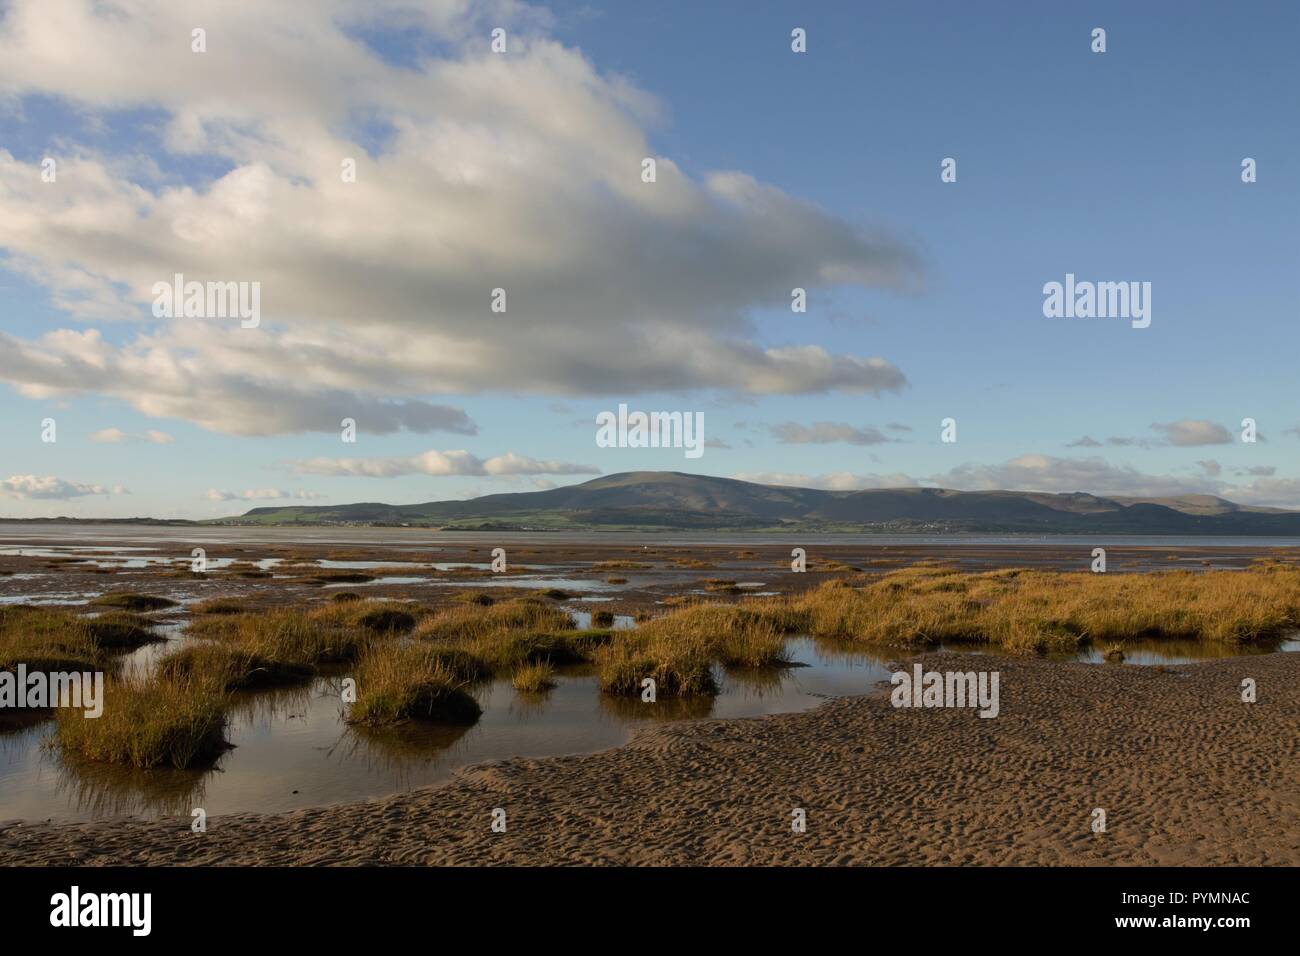 UK Dunnerholme. View towards the distant English Lake District near the Duddon Estuary. Viewed from Dunnerholme near Askam on the Cumbrian Coast UK. Stock Photo